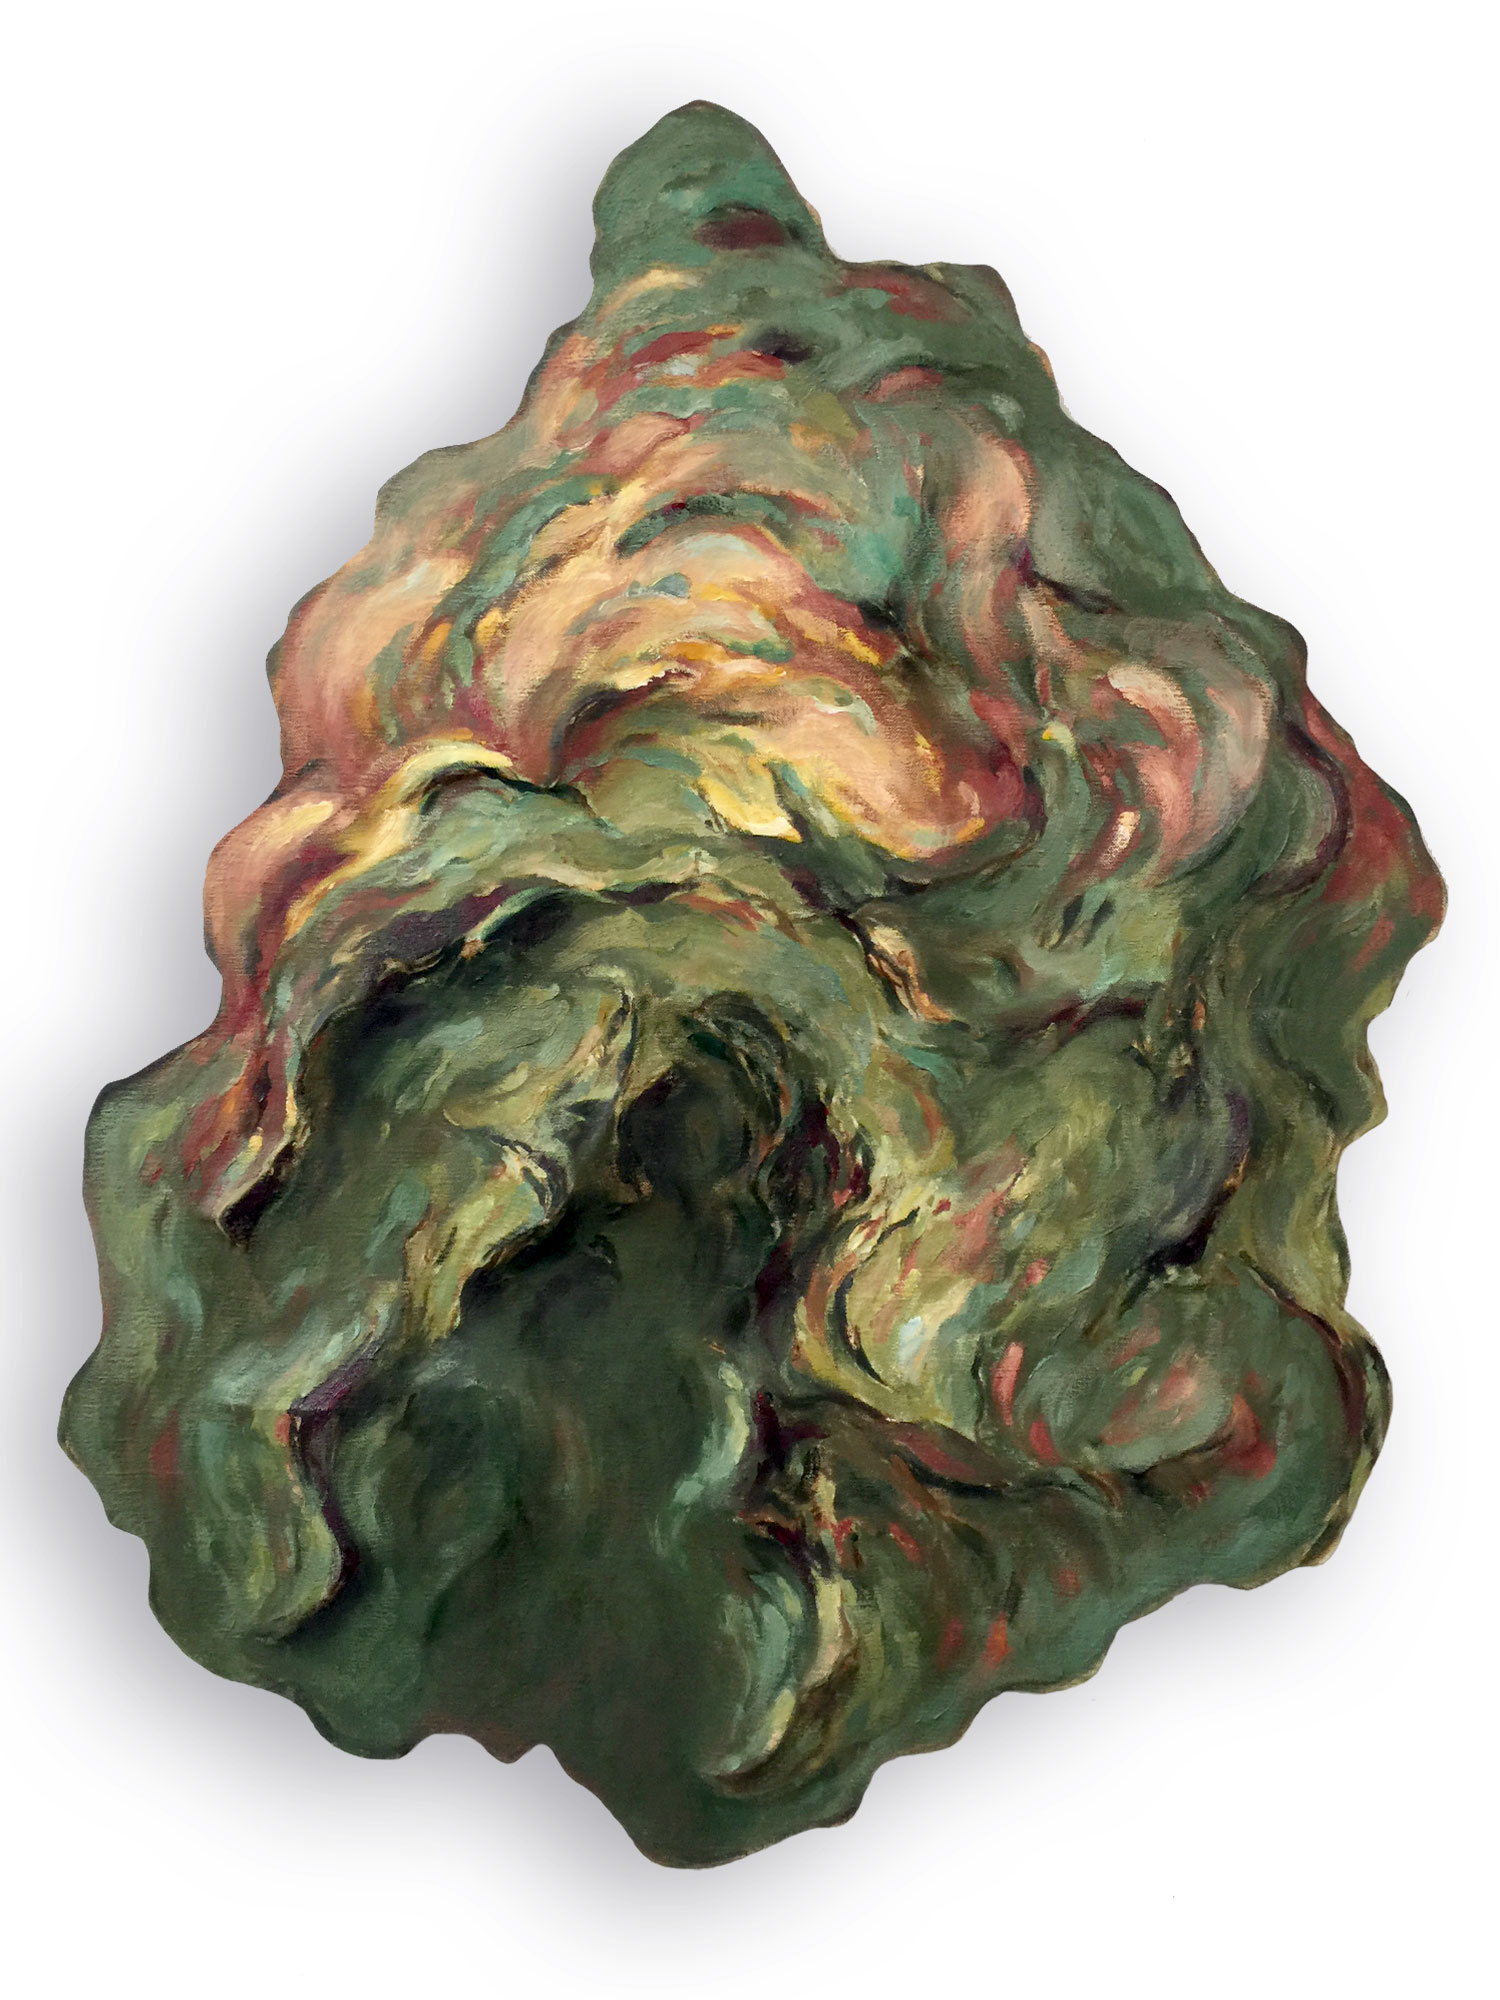 Untitled (Green Pinecone)